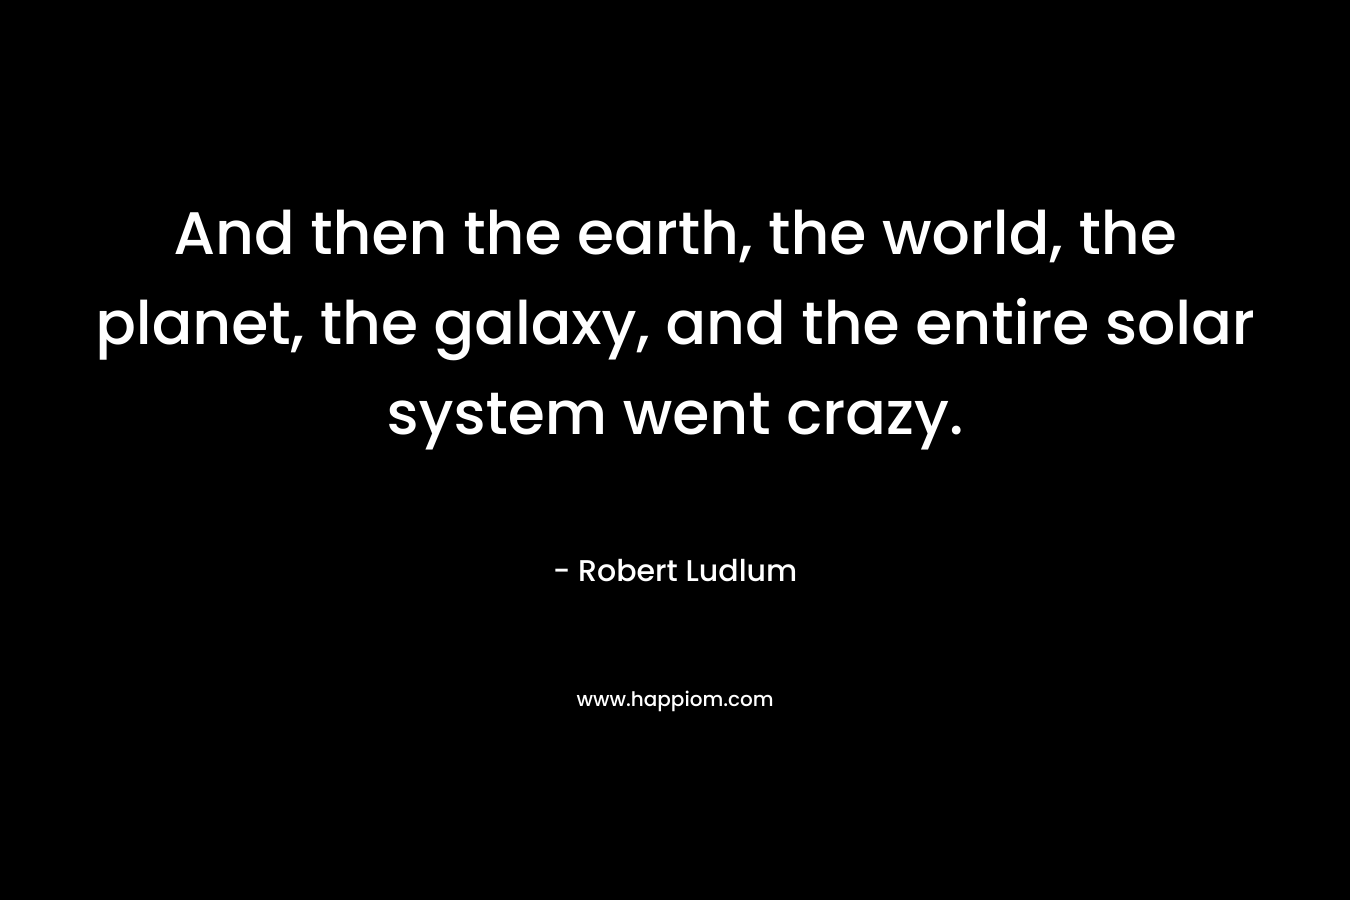 And then the earth, the world, the planet, the galaxy, and the entire solar system went crazy.